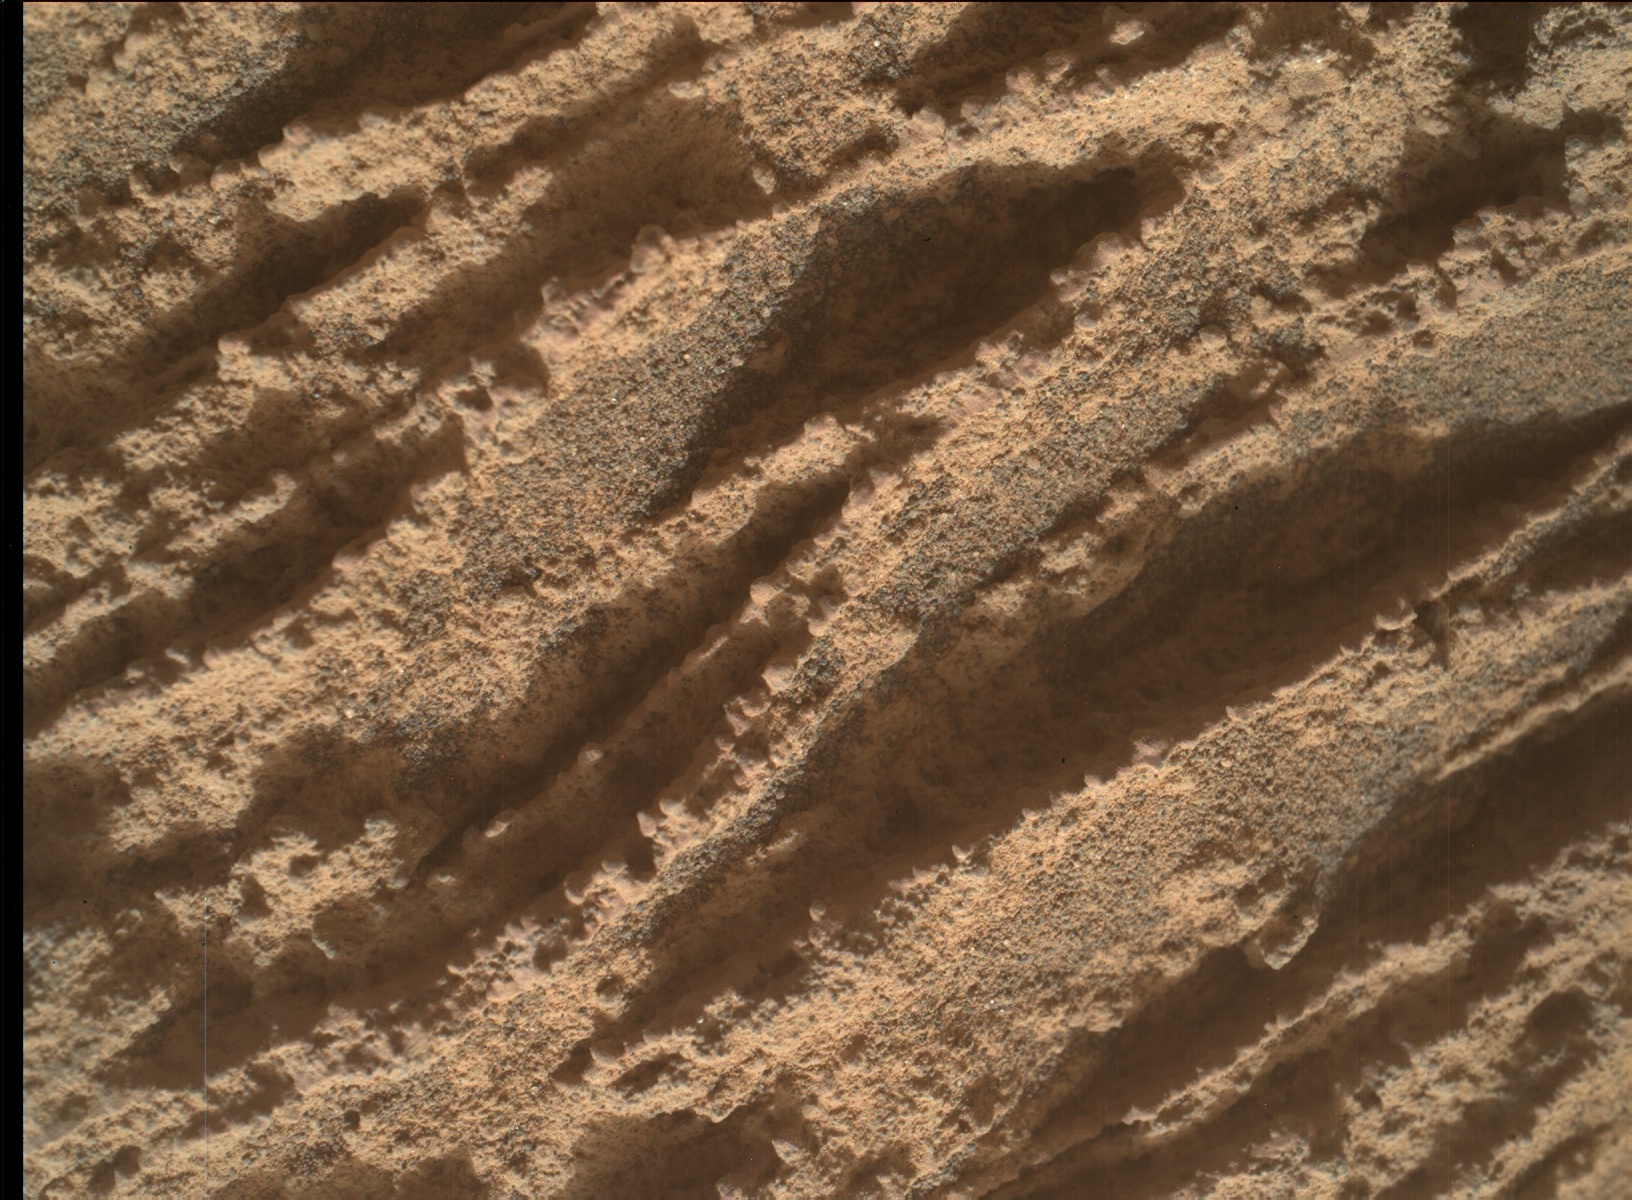 Nasa's Mars rover Curiosity acquired this image using its Mars Hand Lens Imager (MAHLI) on Sol 3362